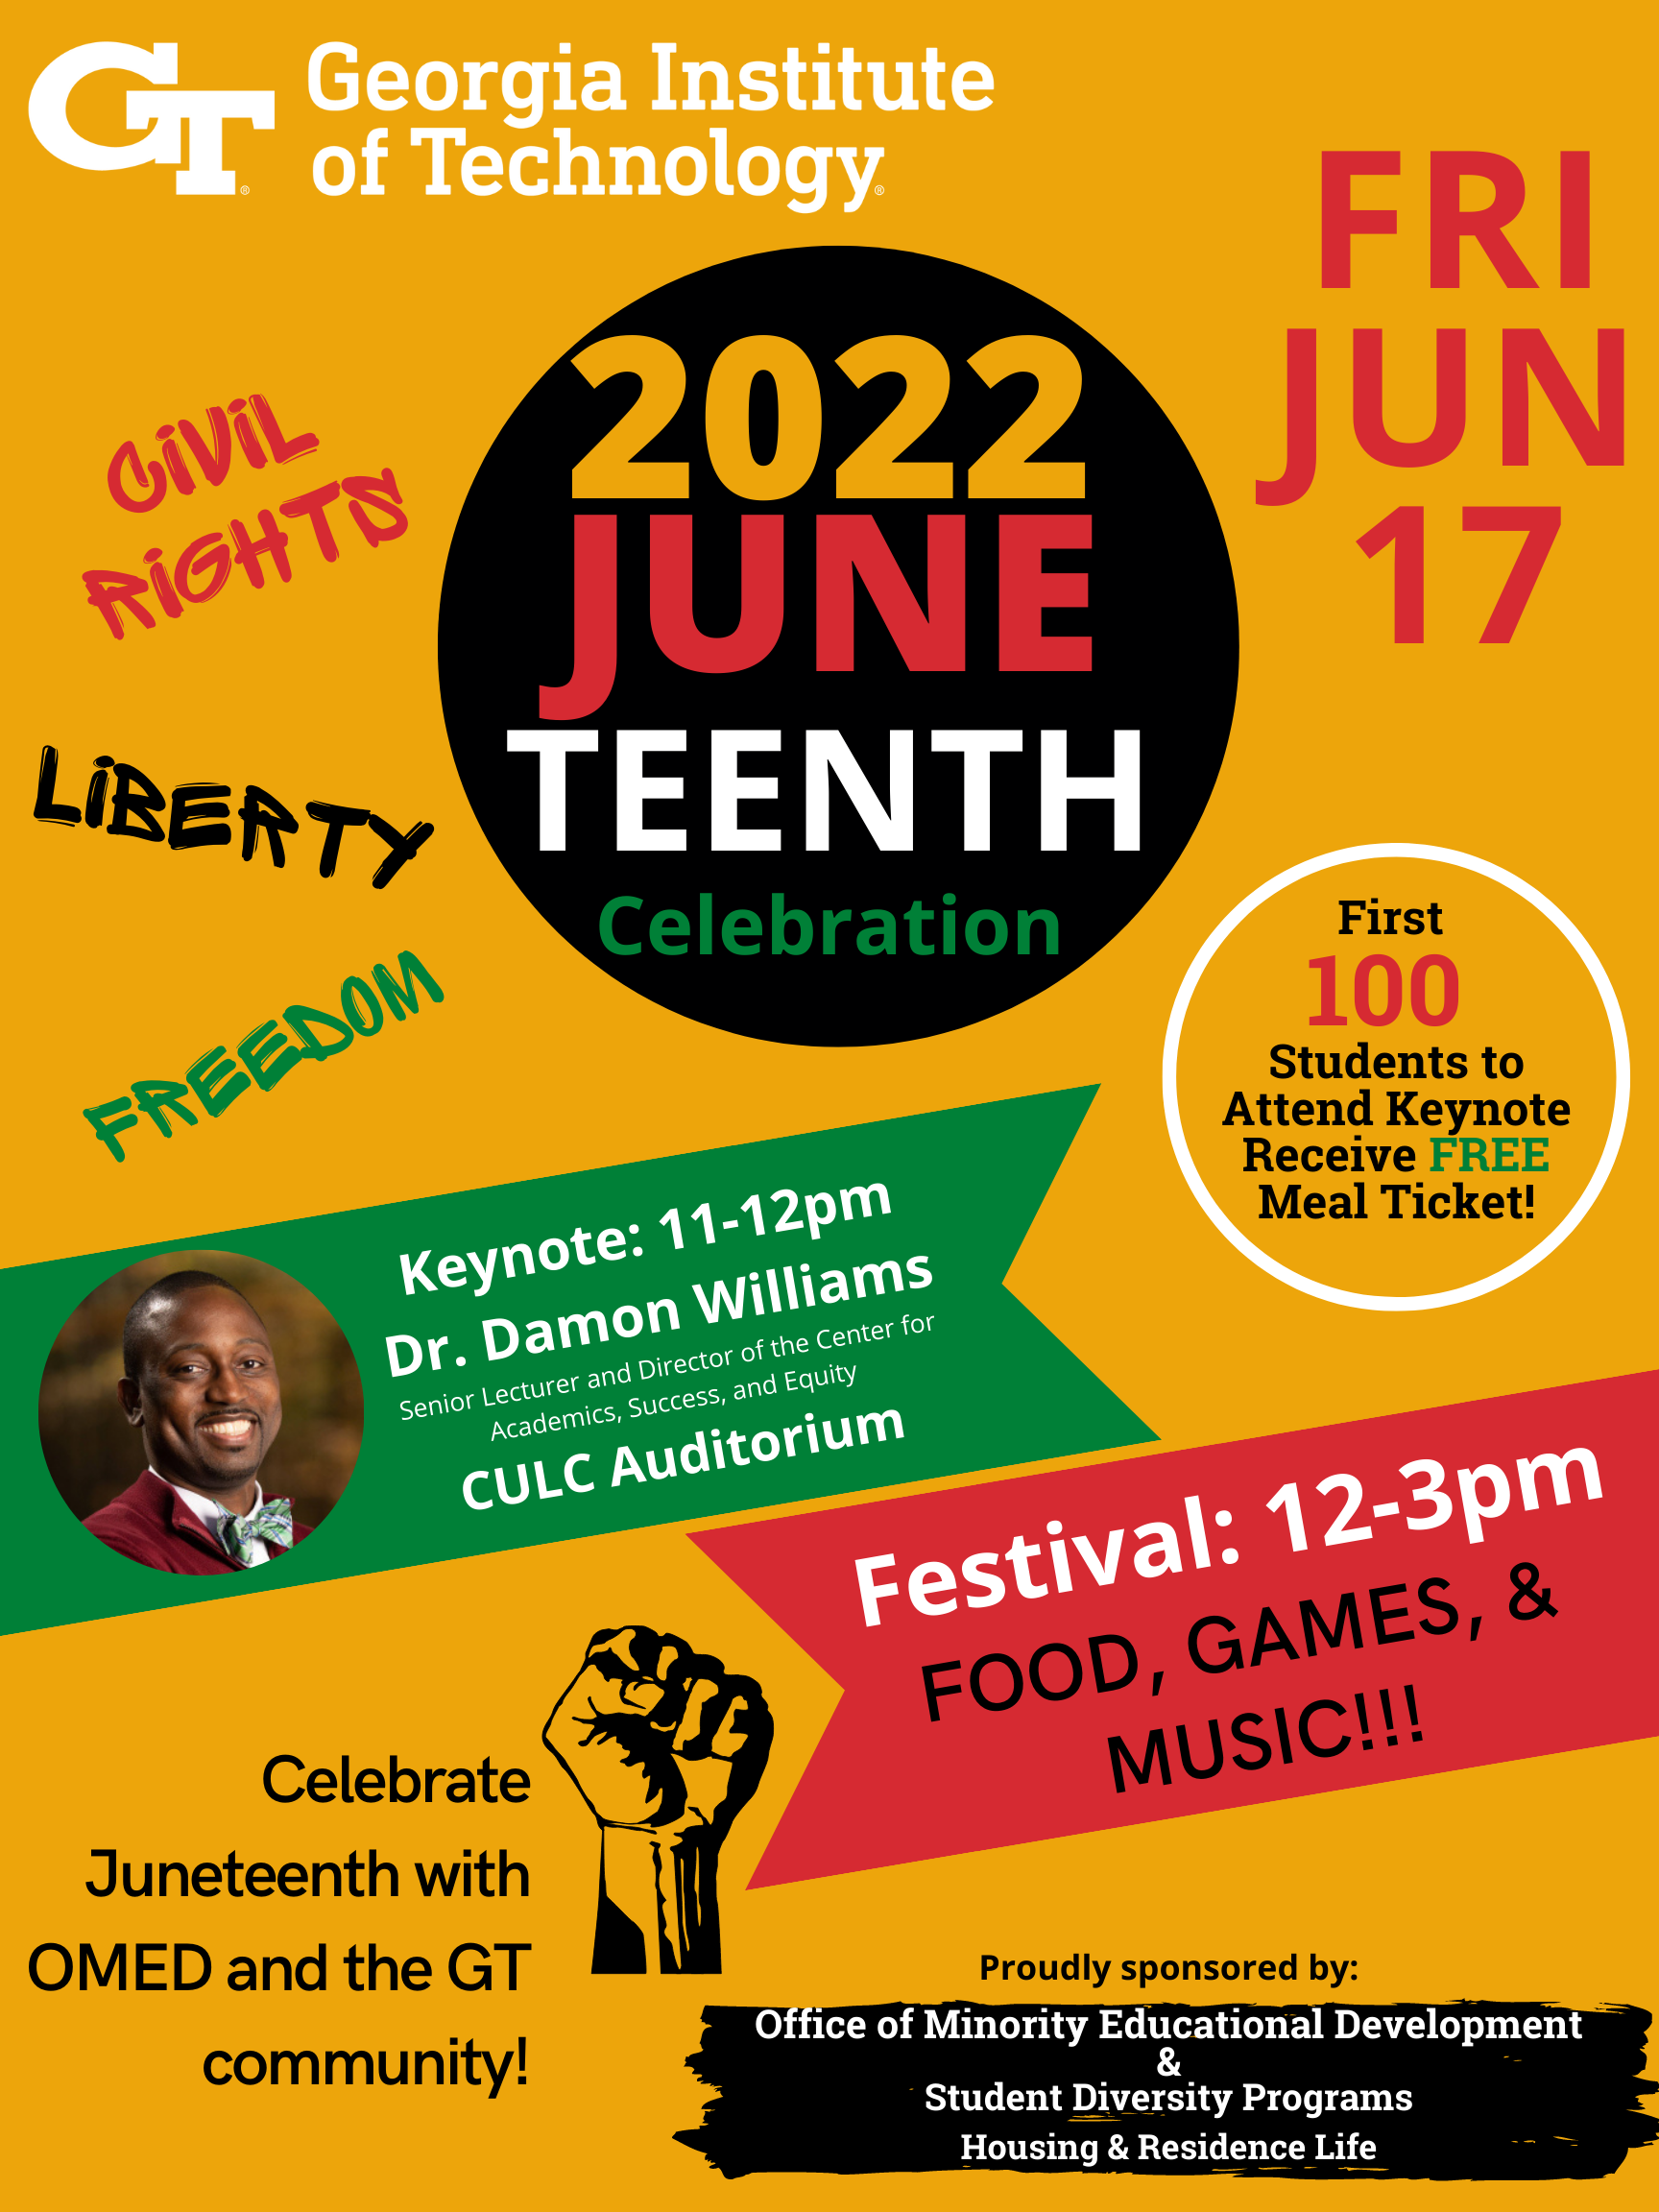 Join OMED for the second annual Georgia Tech Juneteenth celebration on Friday, June 17, 2022. The celebration will feature a keynote address from Damon P. Williams and a festival with music, dance, food, and games, a perfect way to celebrate with participants of all ages.